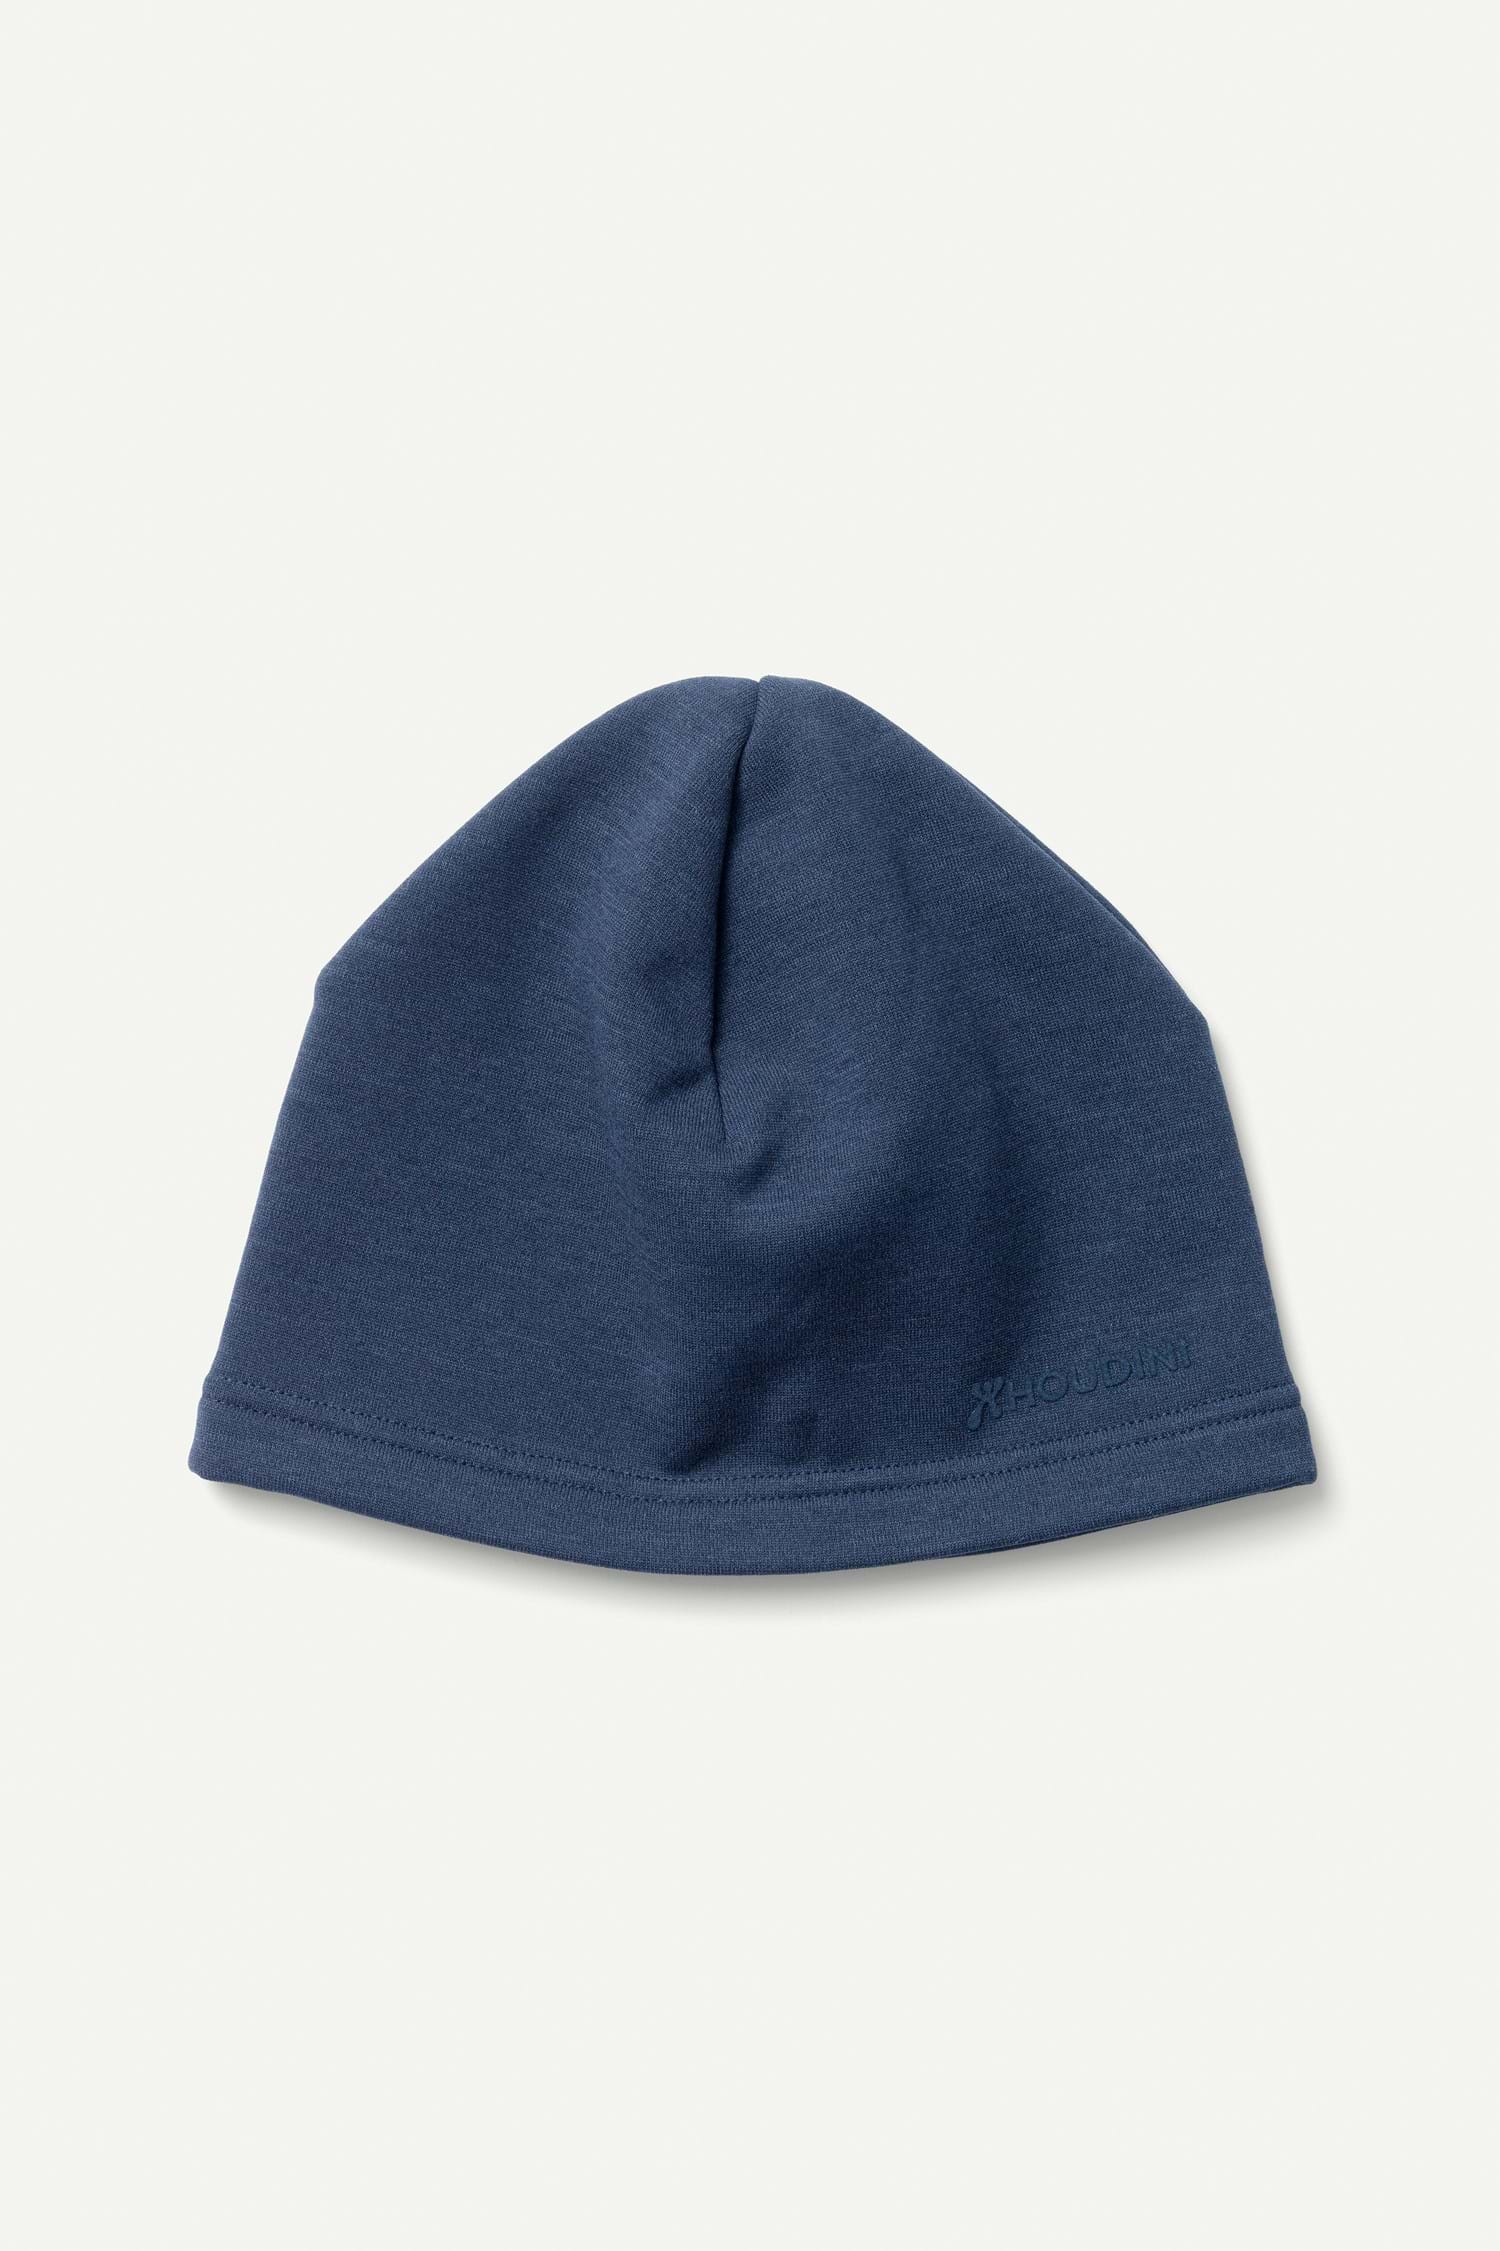 Houdini Kids Outright Hat, Cloudy Blue, 48/50